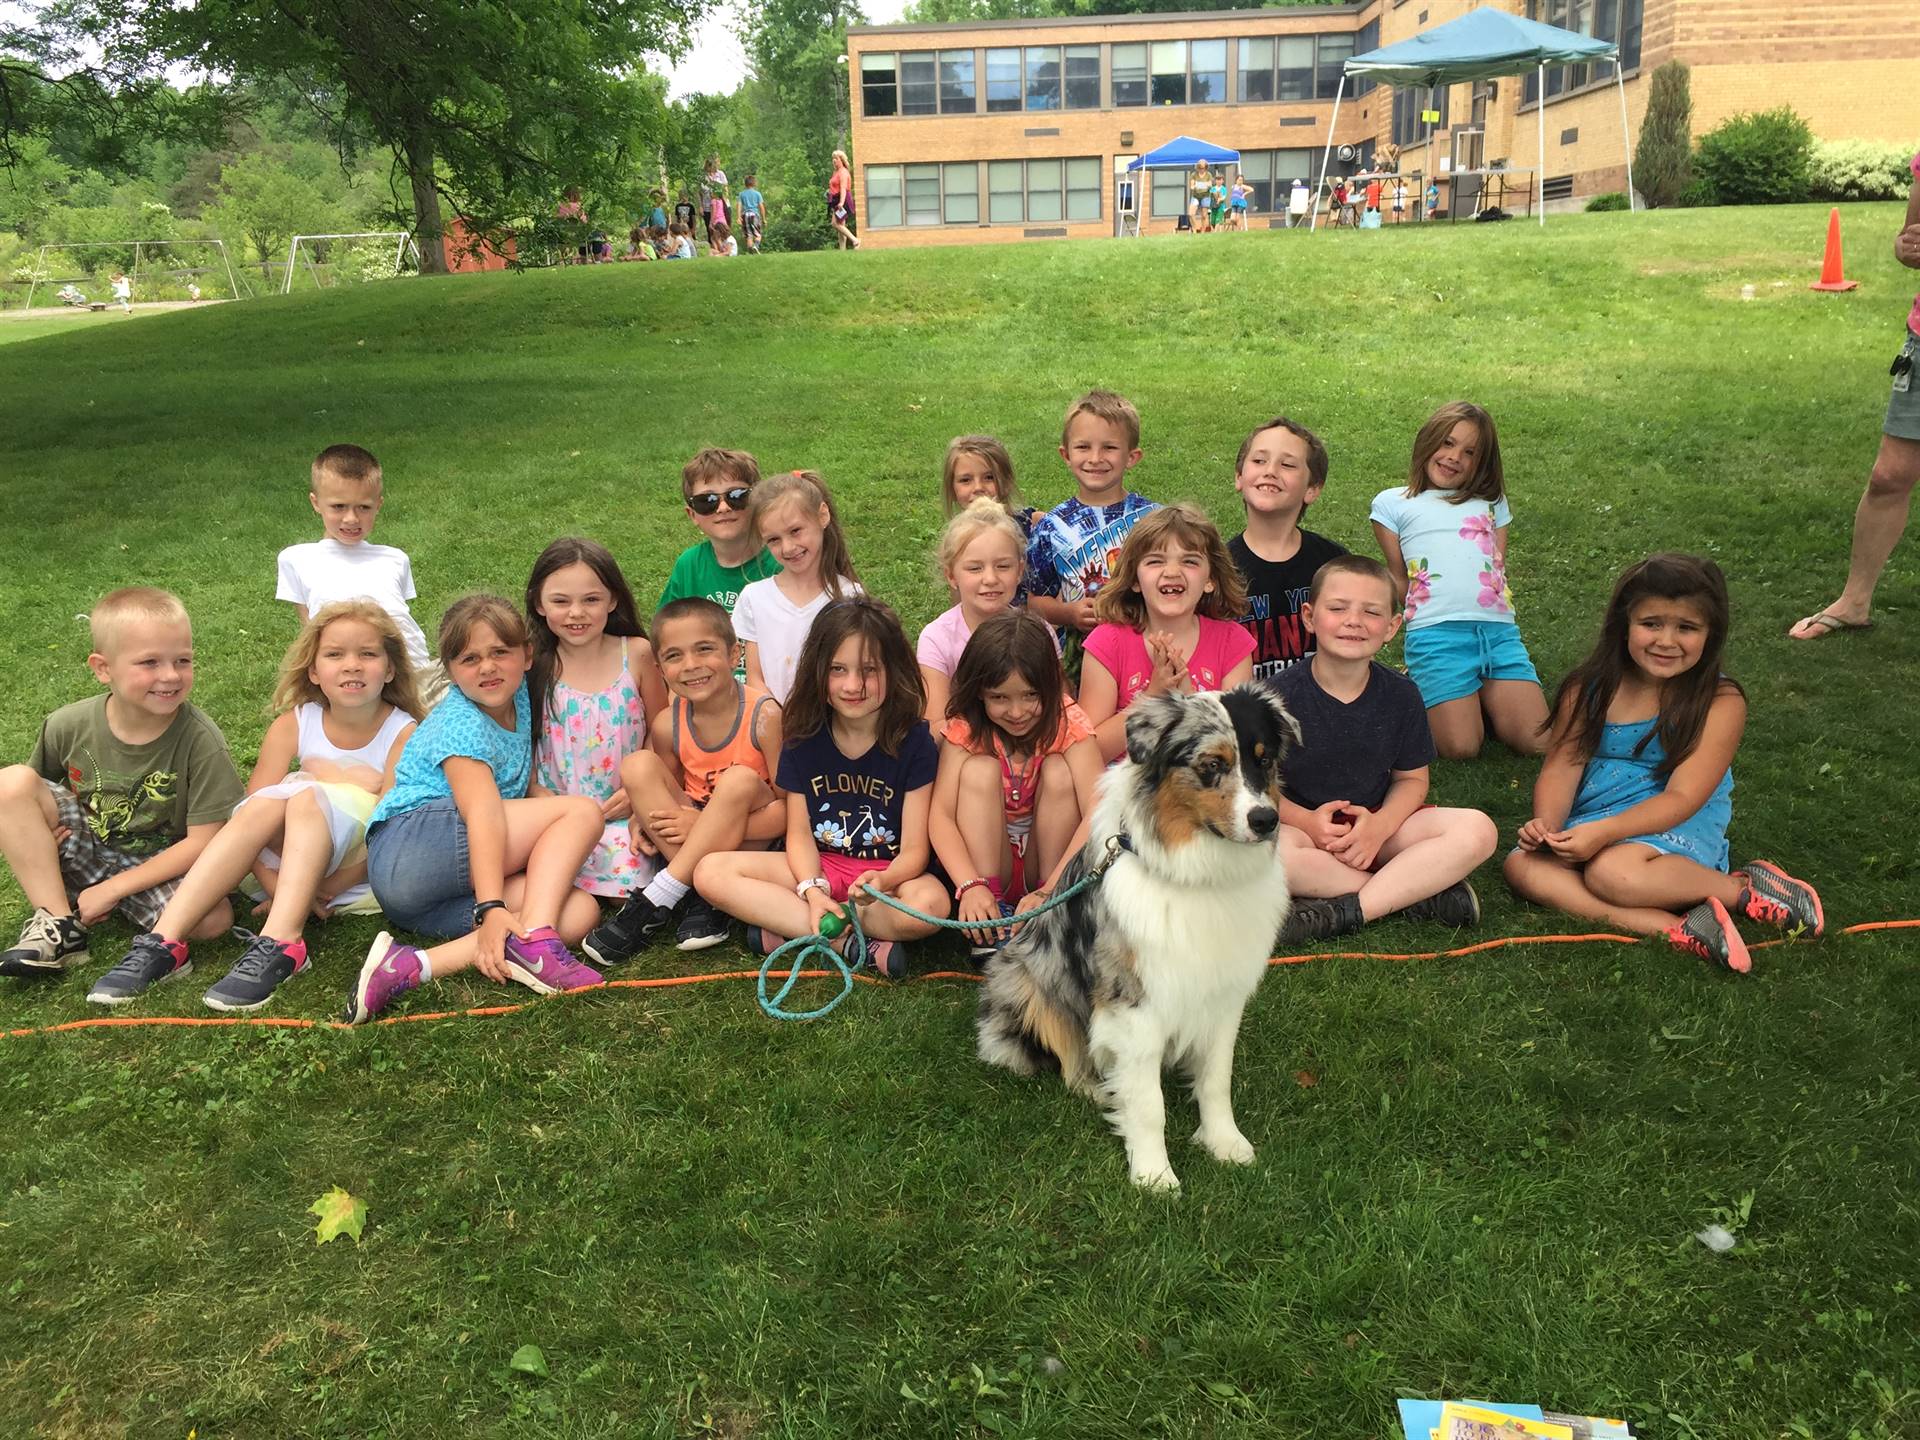 Tucker the therapy dog joins in camping fun with guilford students.